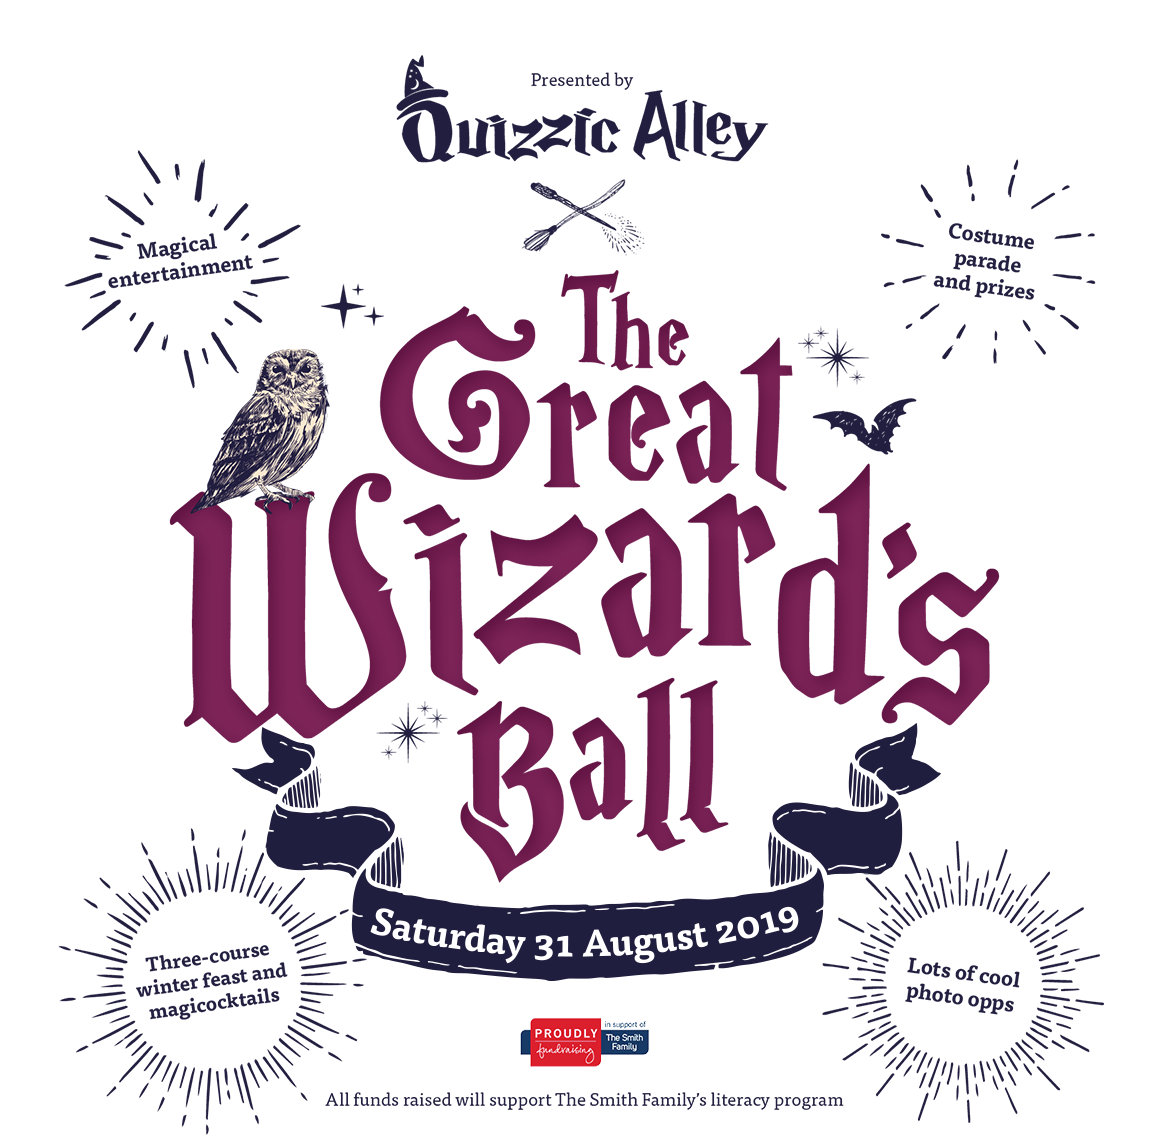 Quizzic Alley Great Wizards Ball, Saturday 22 June 2019